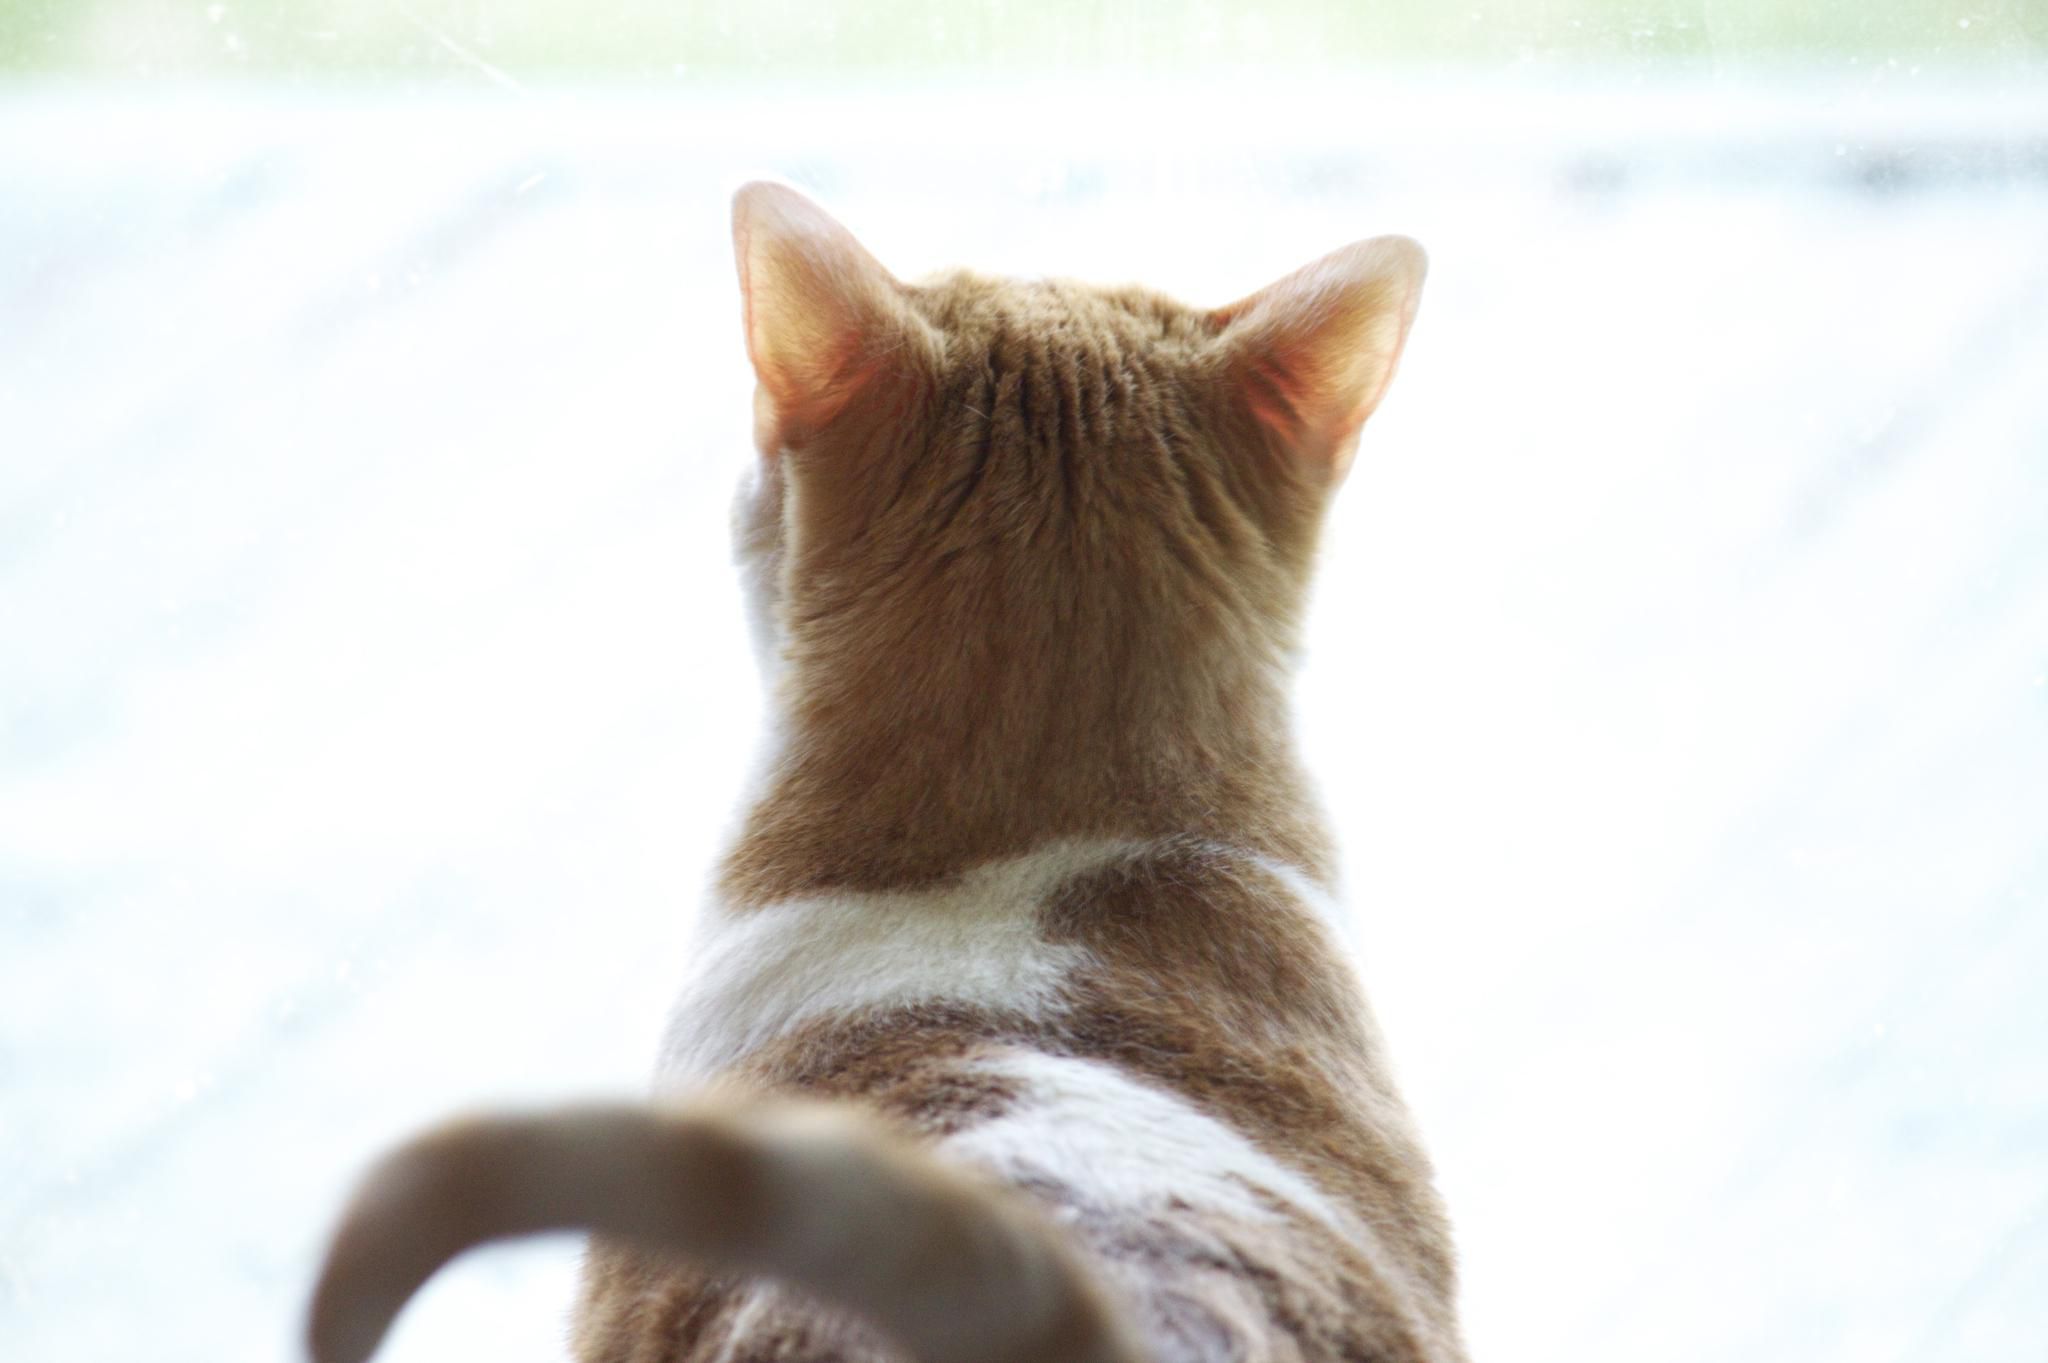 View of a cat from behind.